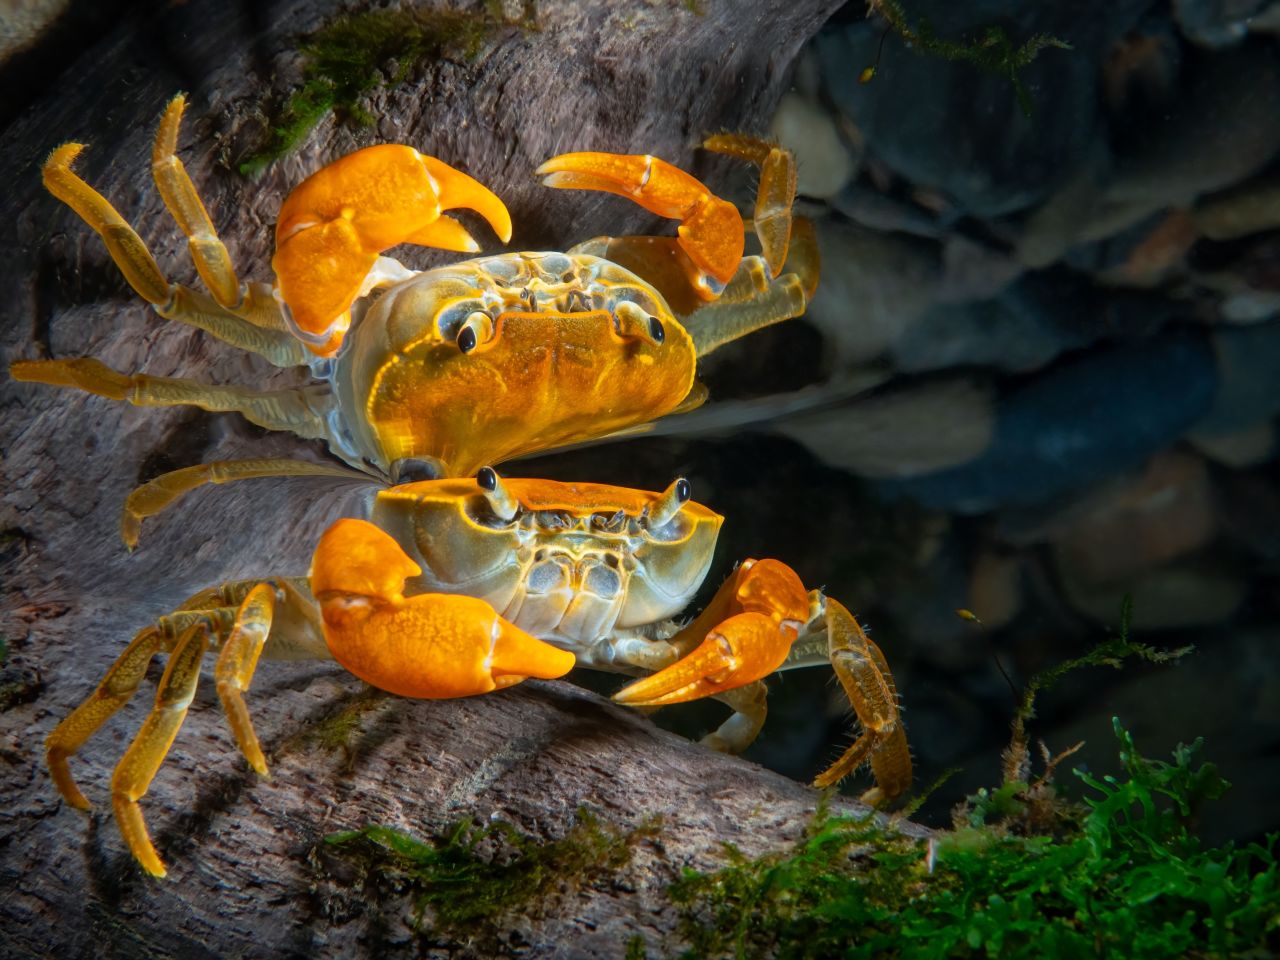 In Pinglin, Taiwan, this crab found itself seeing double -- and won photographer Kuo-Wei Kao first place in the Portrait category. The photographer told Ocean Art that it took many attempts to capture the "perfect reflection."